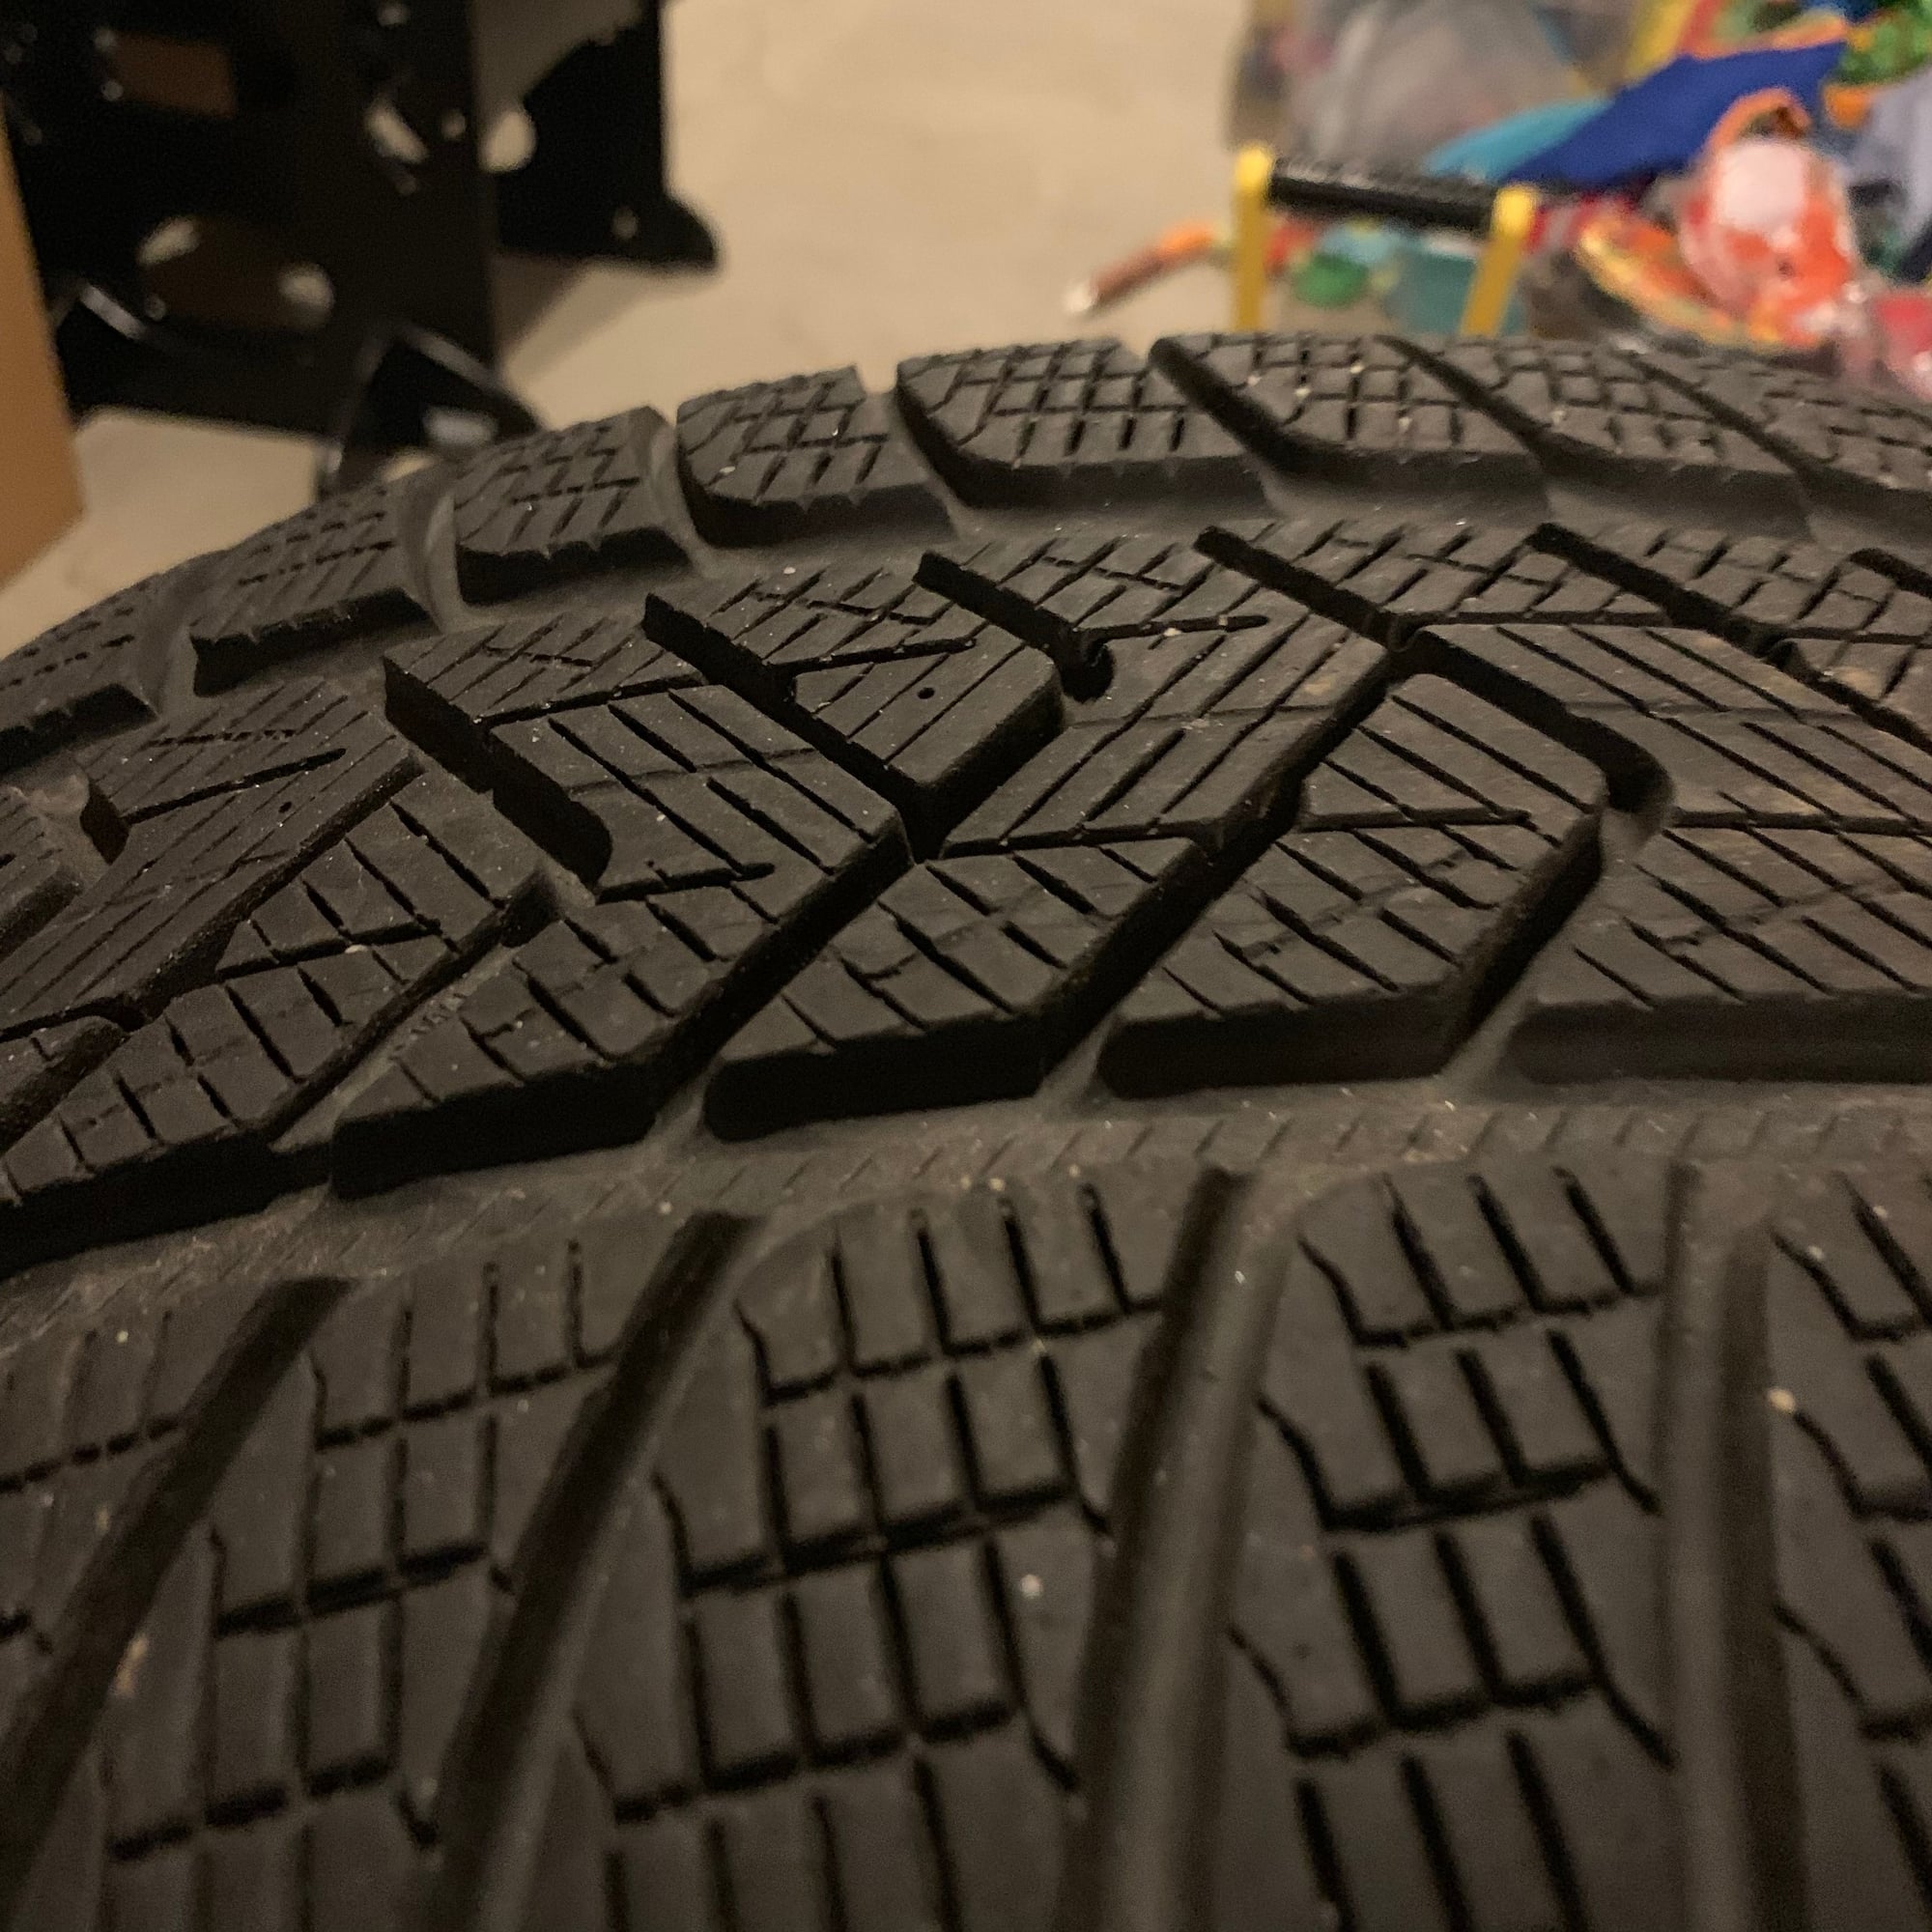 Wheels and Tires/Axles - Cayenne wheels and snow tires - Used - All Years Porsche Cayenne - Windham, NH 03087, United States